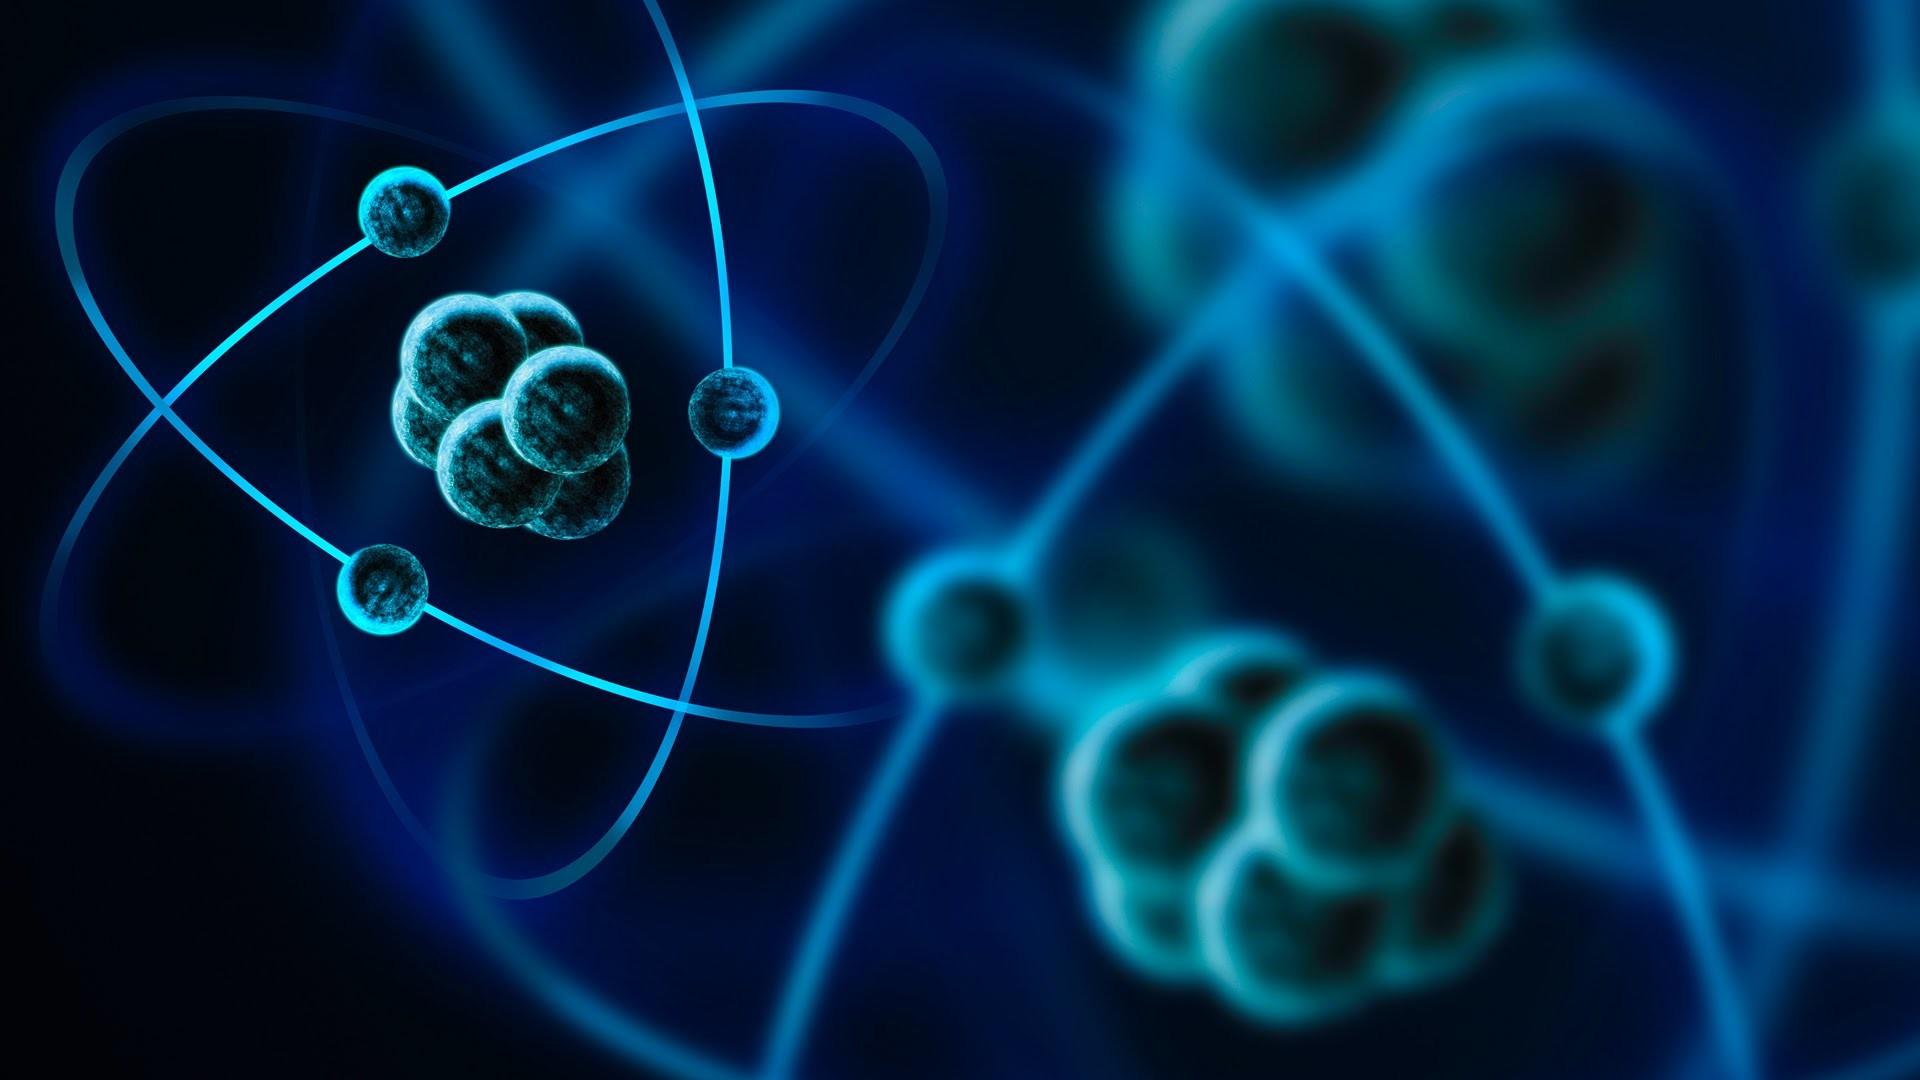 8 inspiring and free scientific wallpapers to smarten up any device